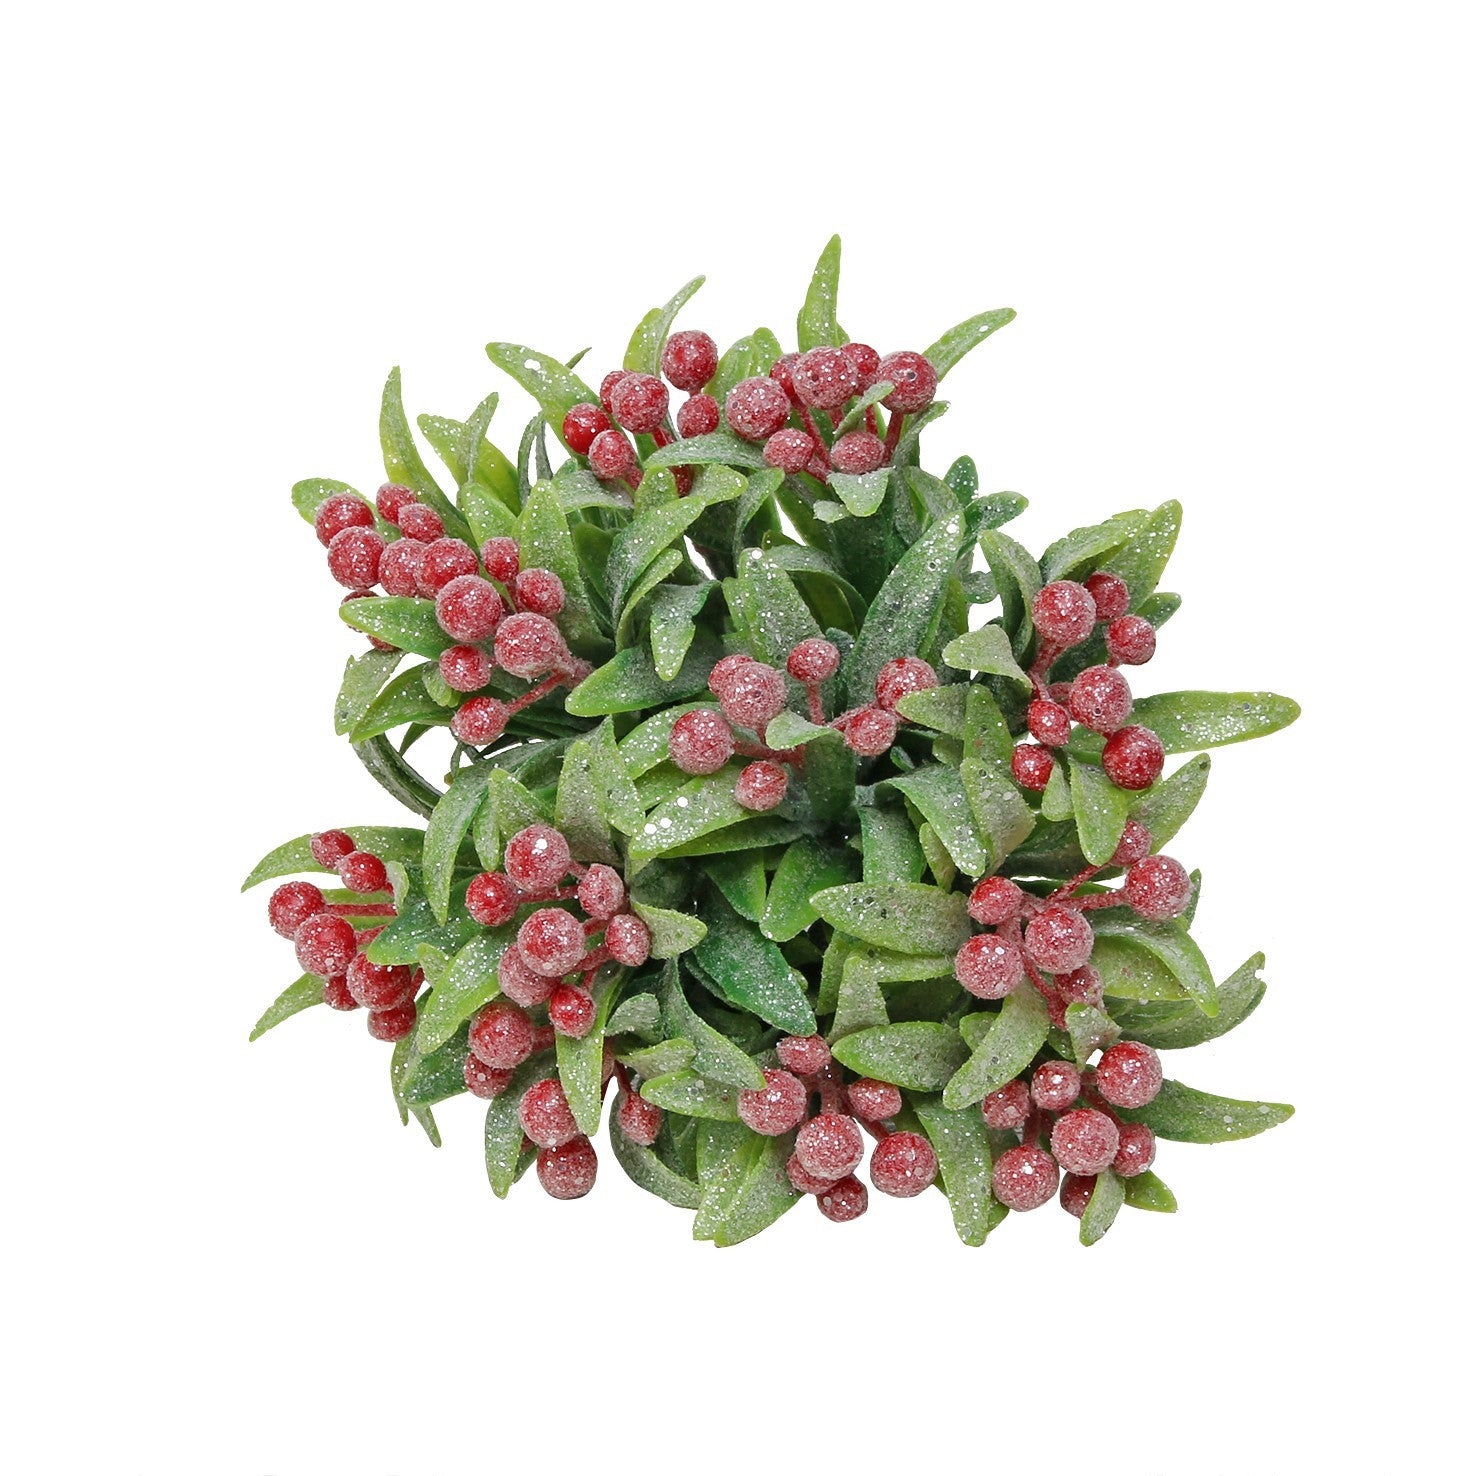 View Frosted Red Berry Bunch with Green Leaves information